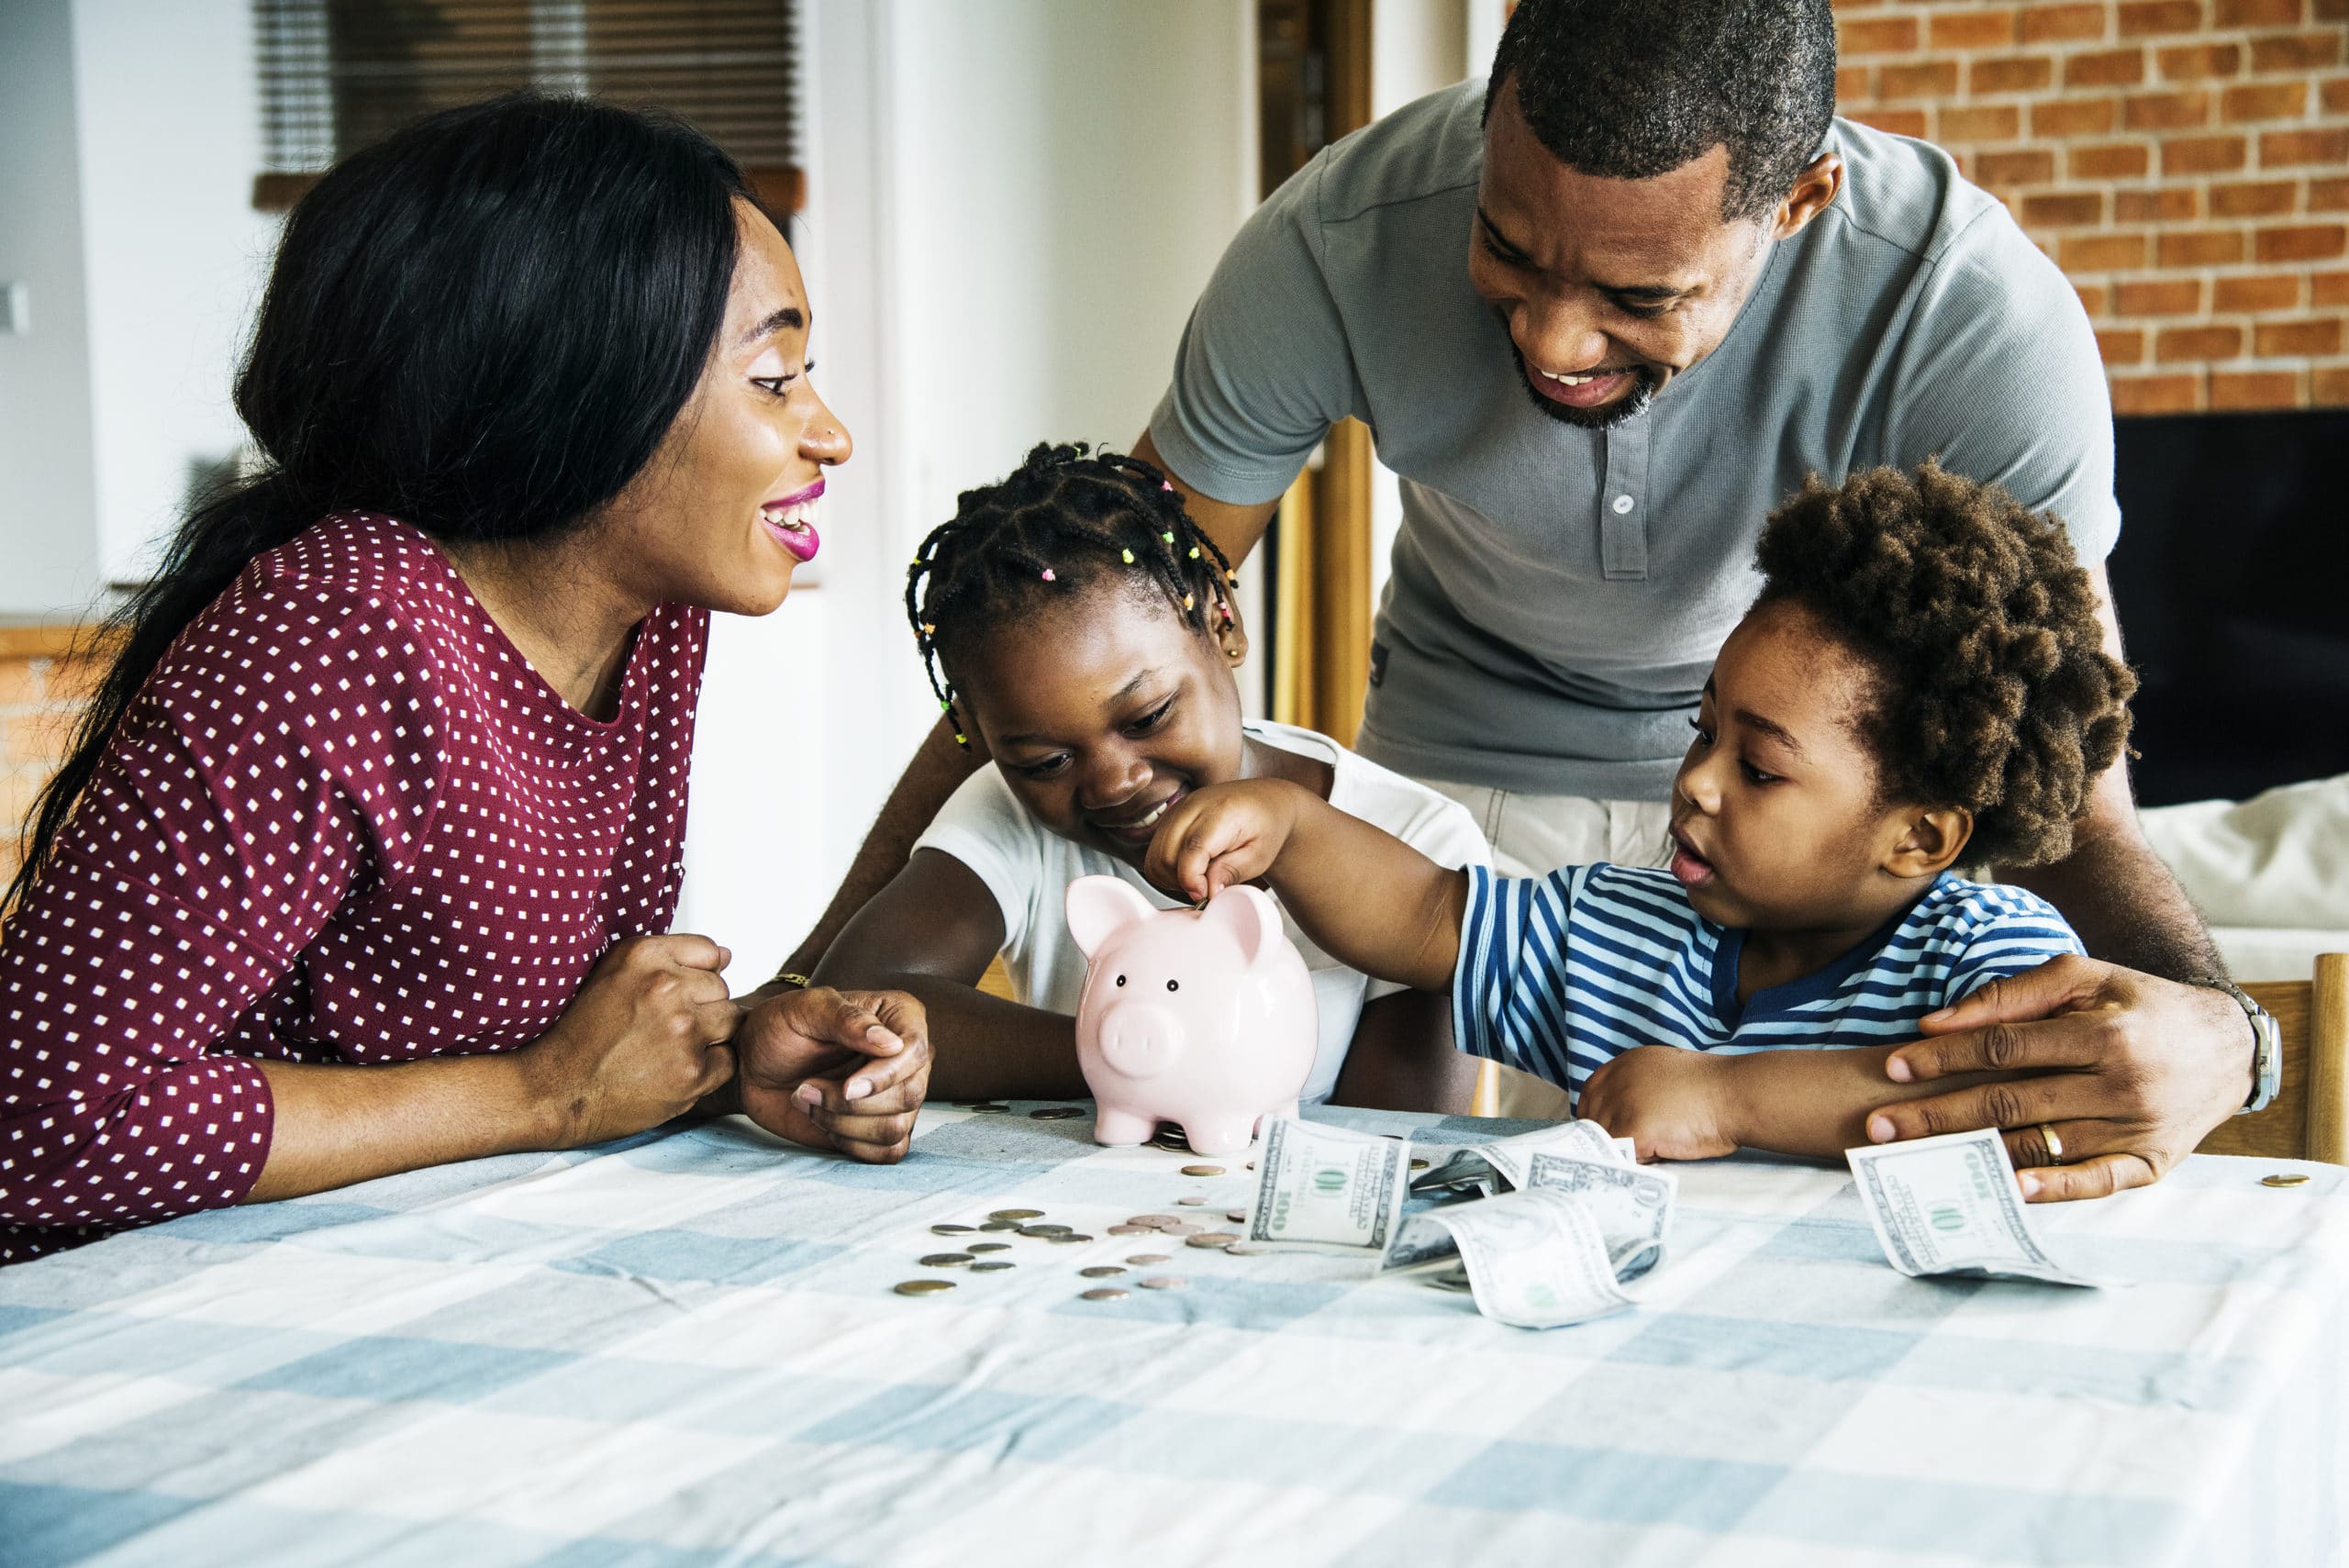 Family of two adults and two children putting money into a piggy bank